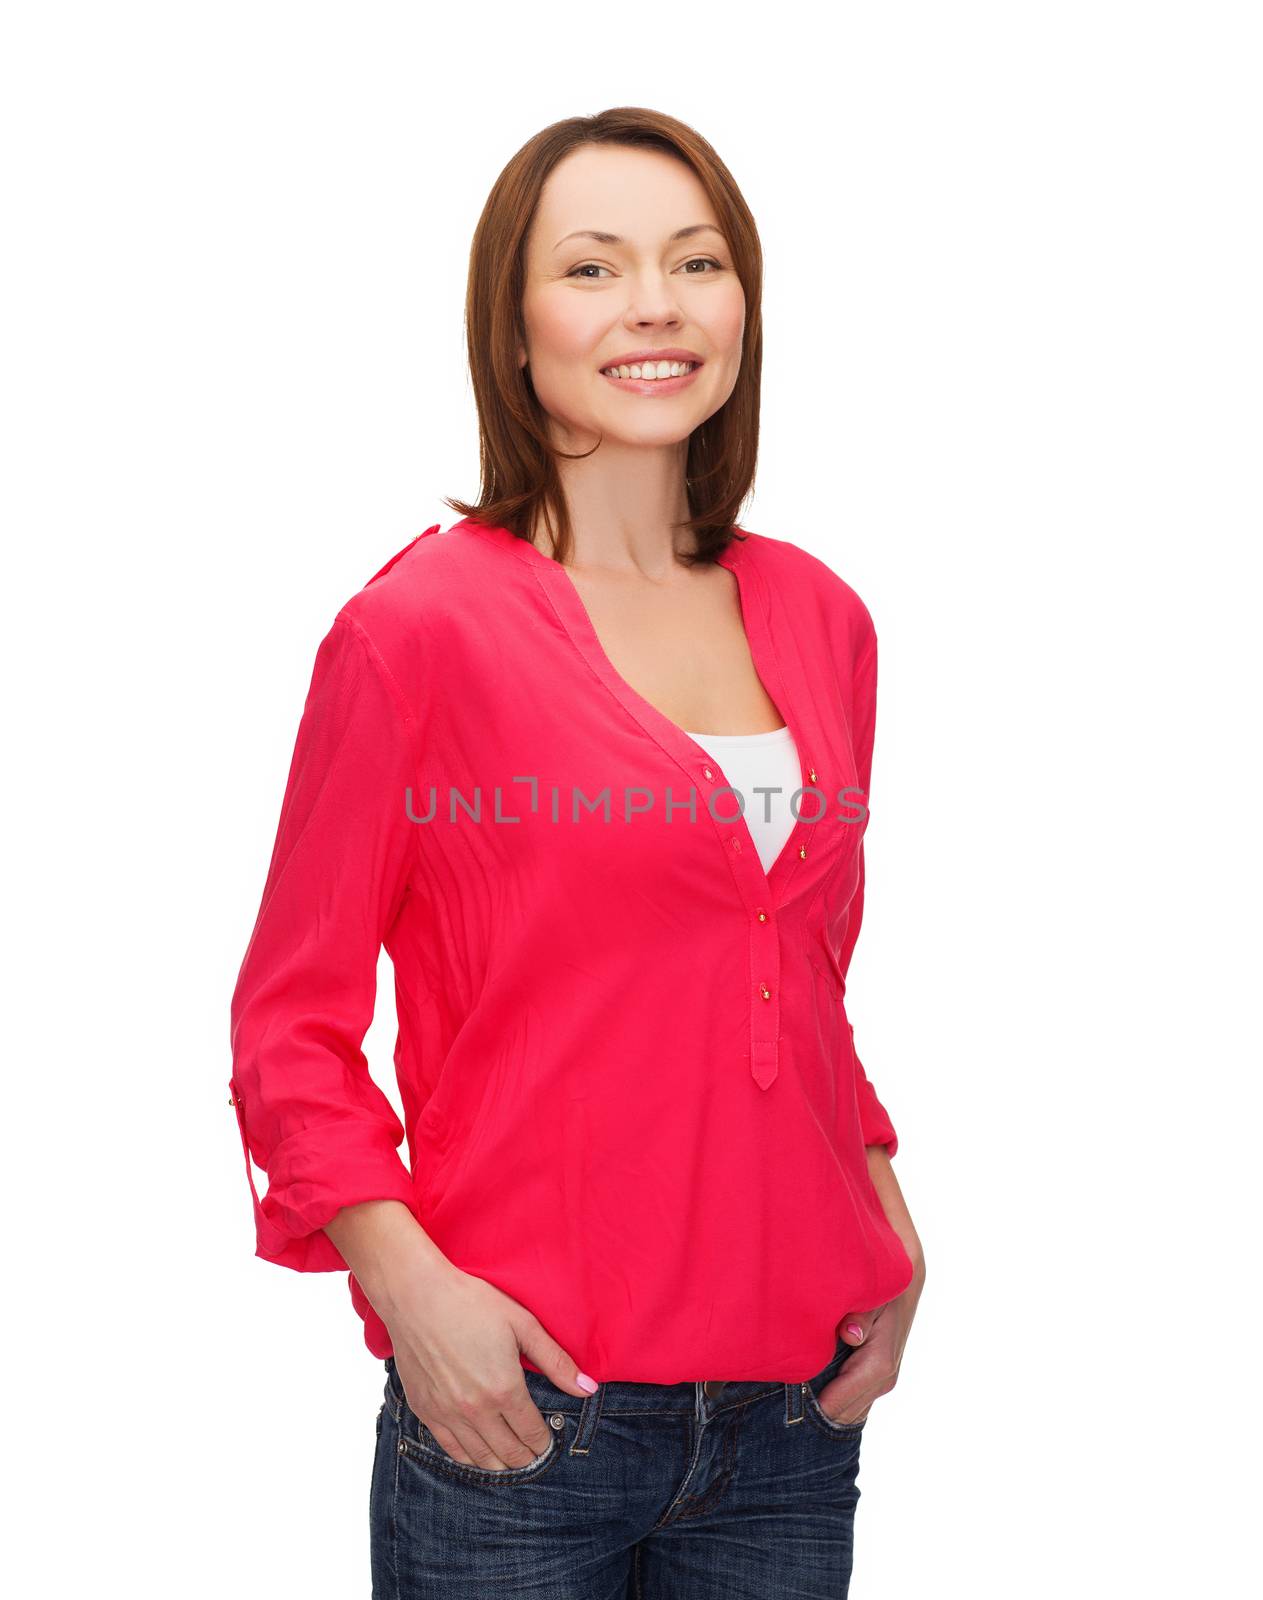 happy people concept - smiling woman in casual clothes